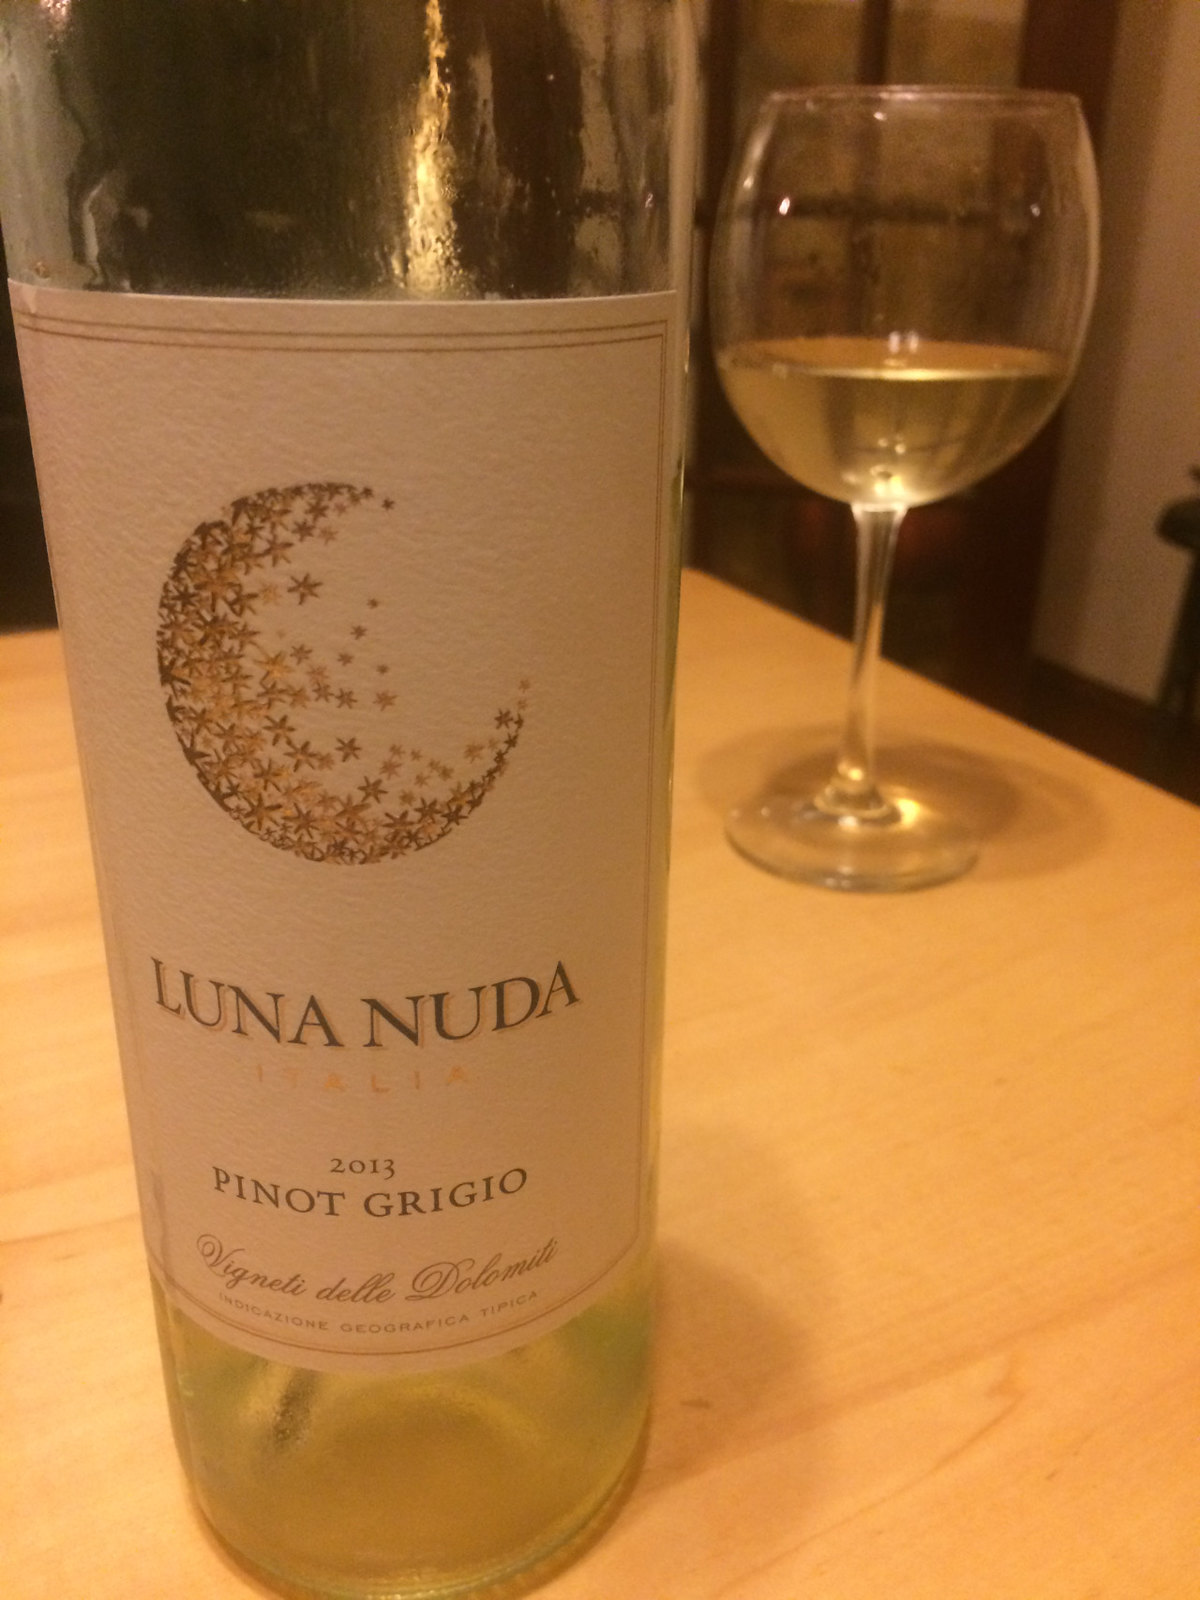 The Search for an Inexpensive Dinner Wine-Part 2 6